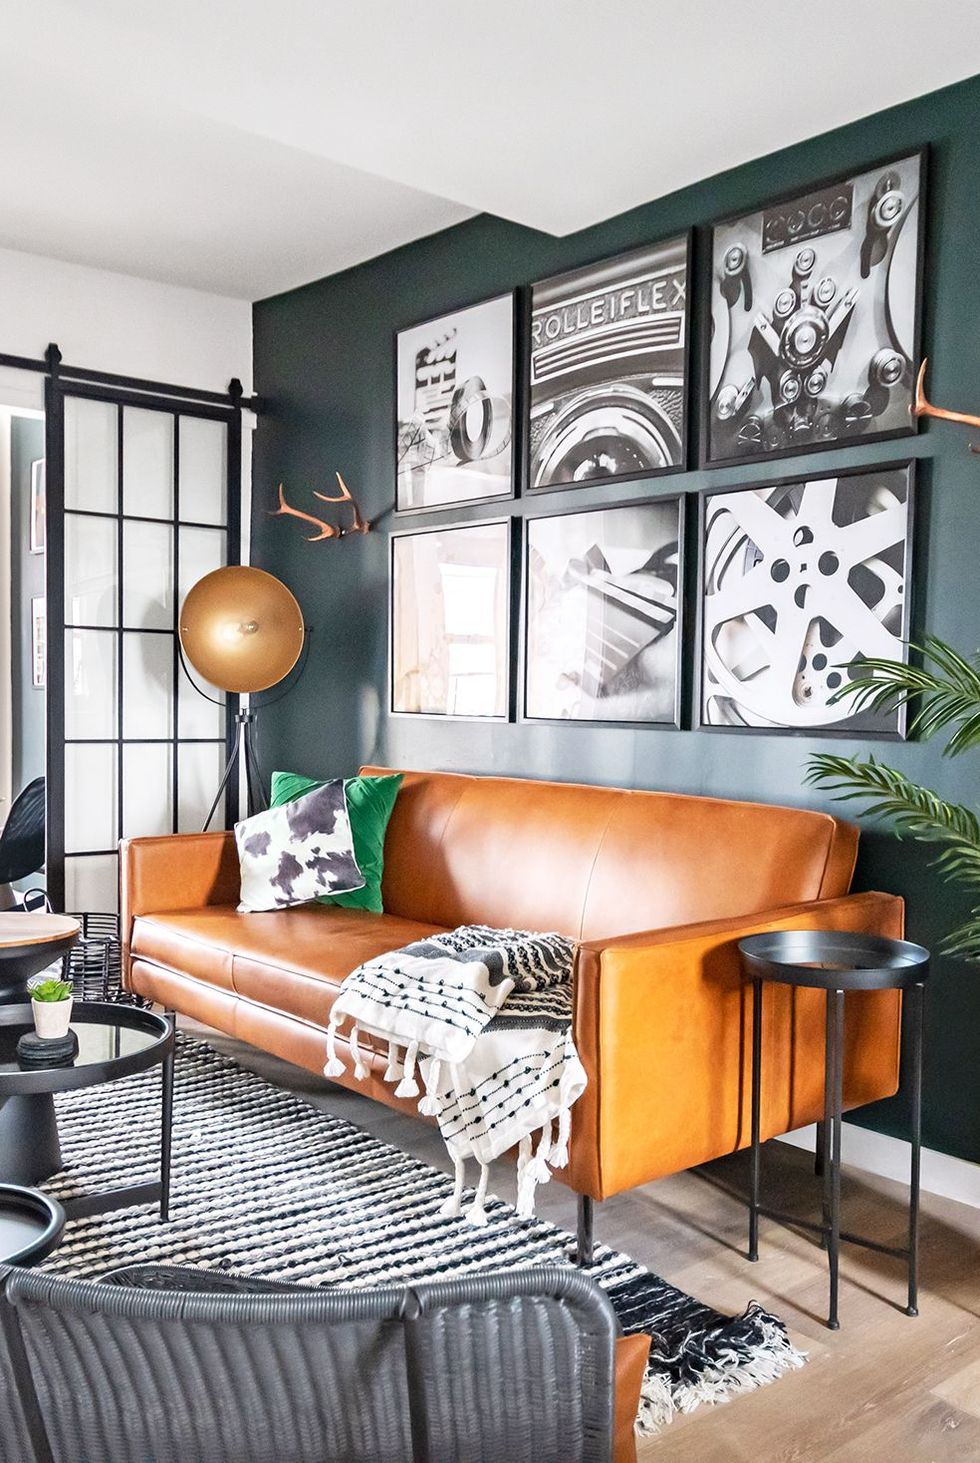 Modern Apartment Decor: How to Decorate Your Apartment to be Unique 